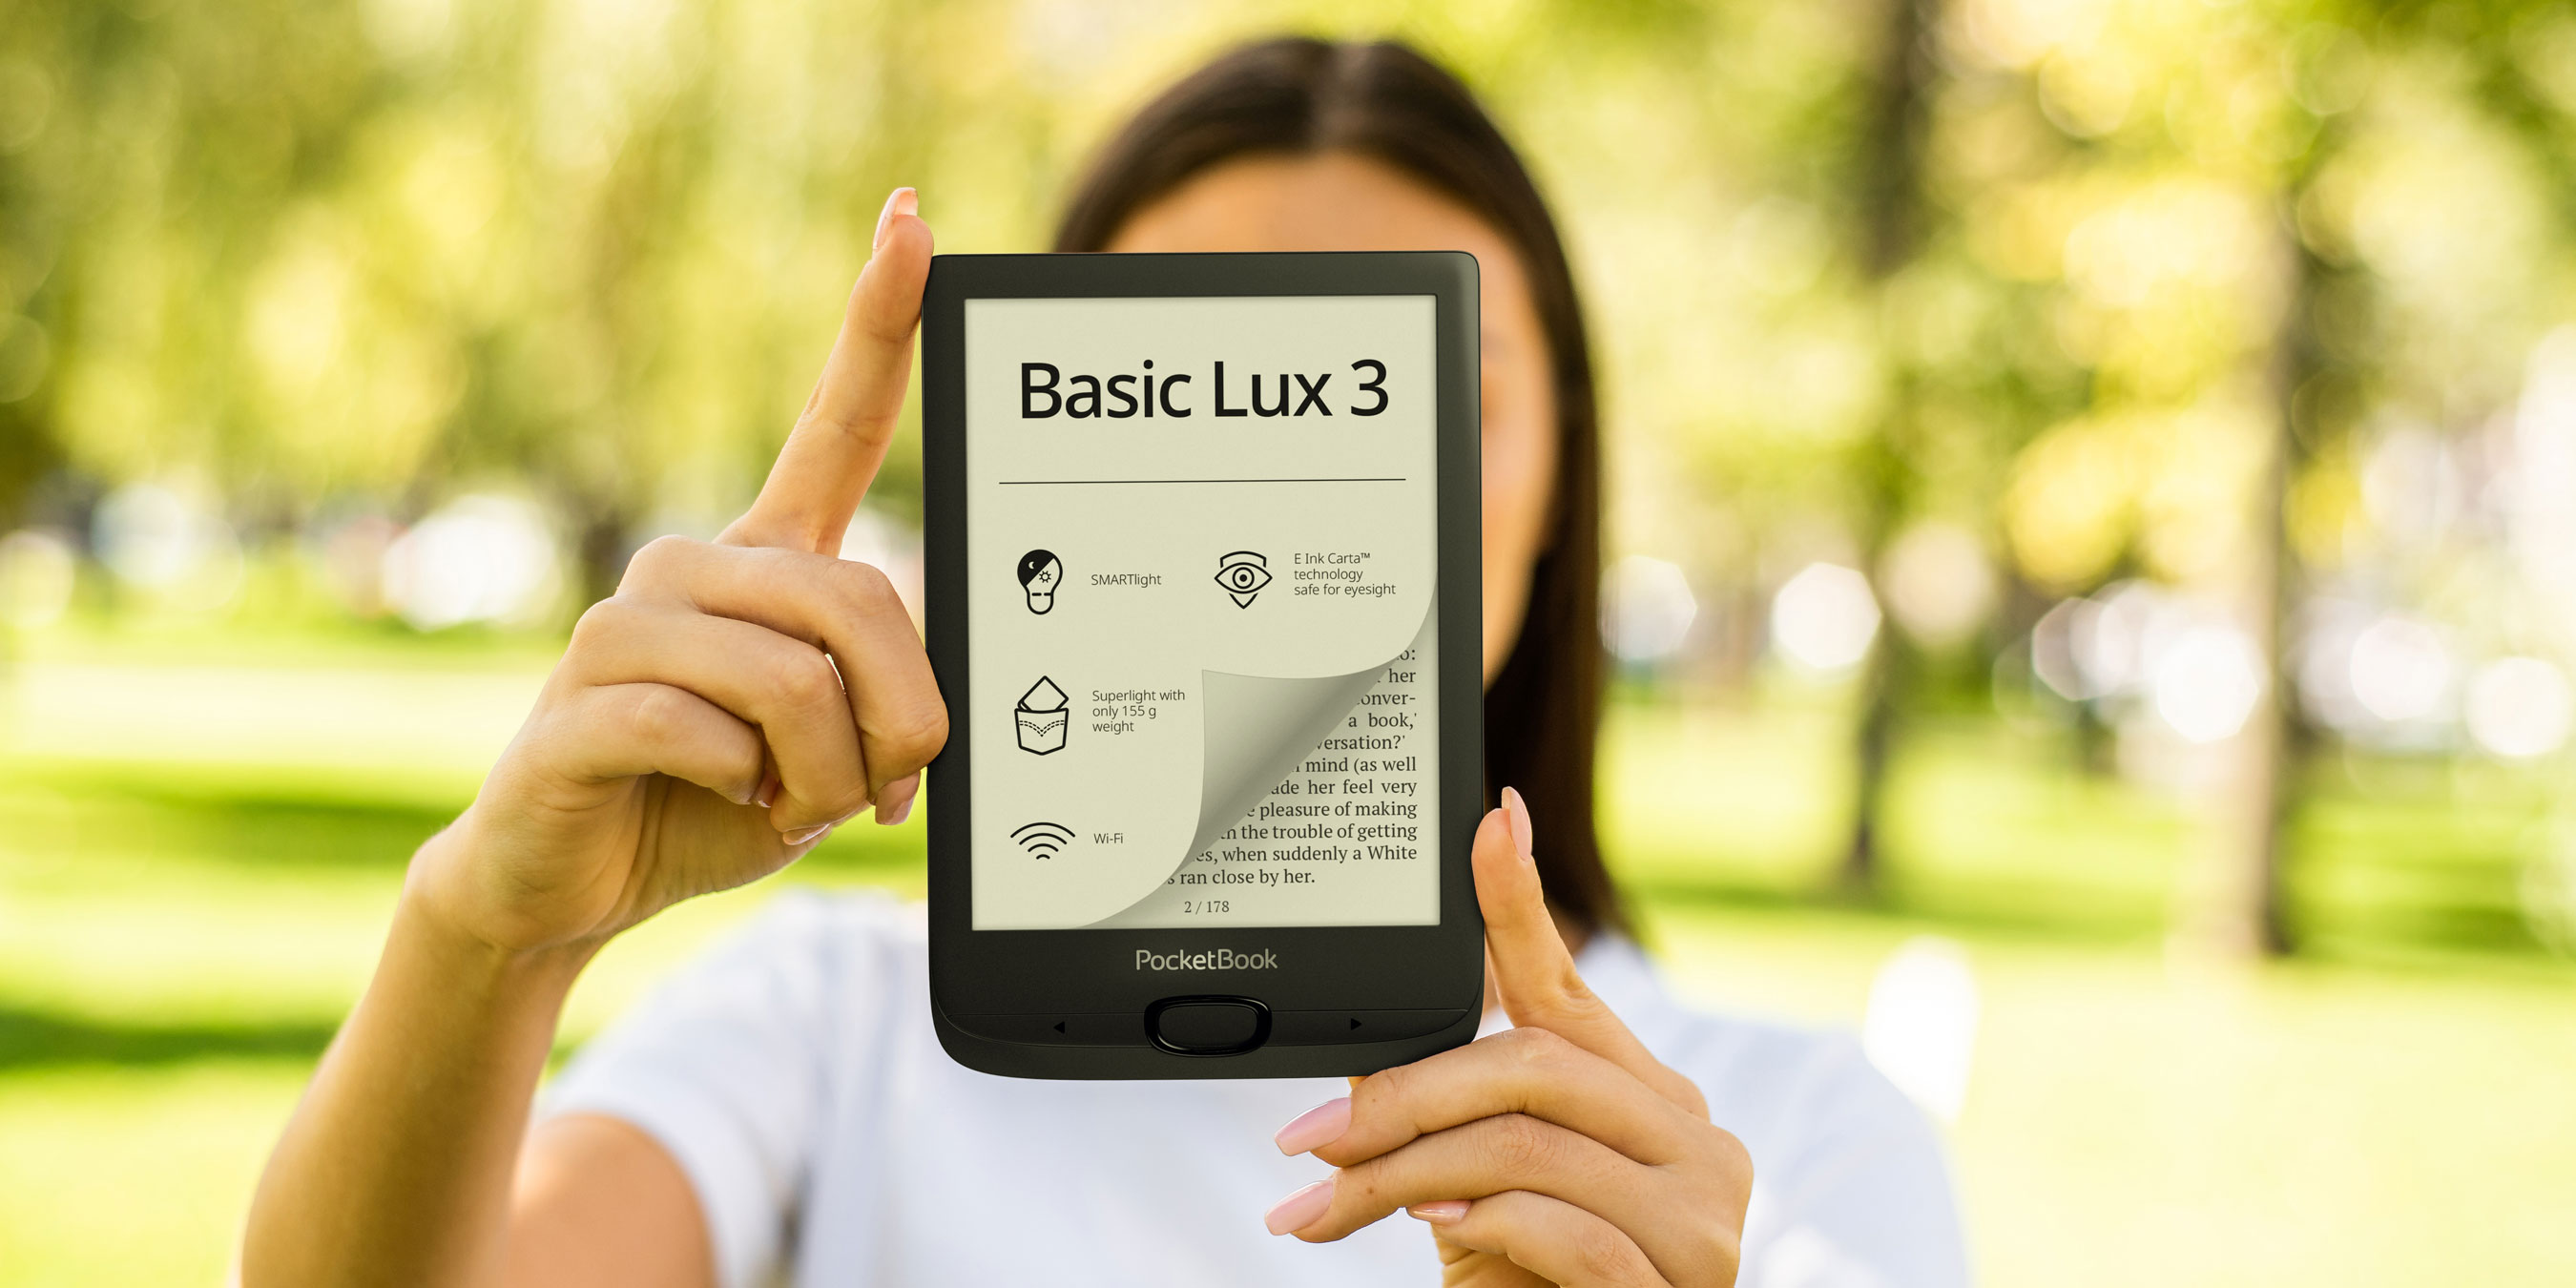 more PocketBook possibilities, Lux 3: more Basic comfort